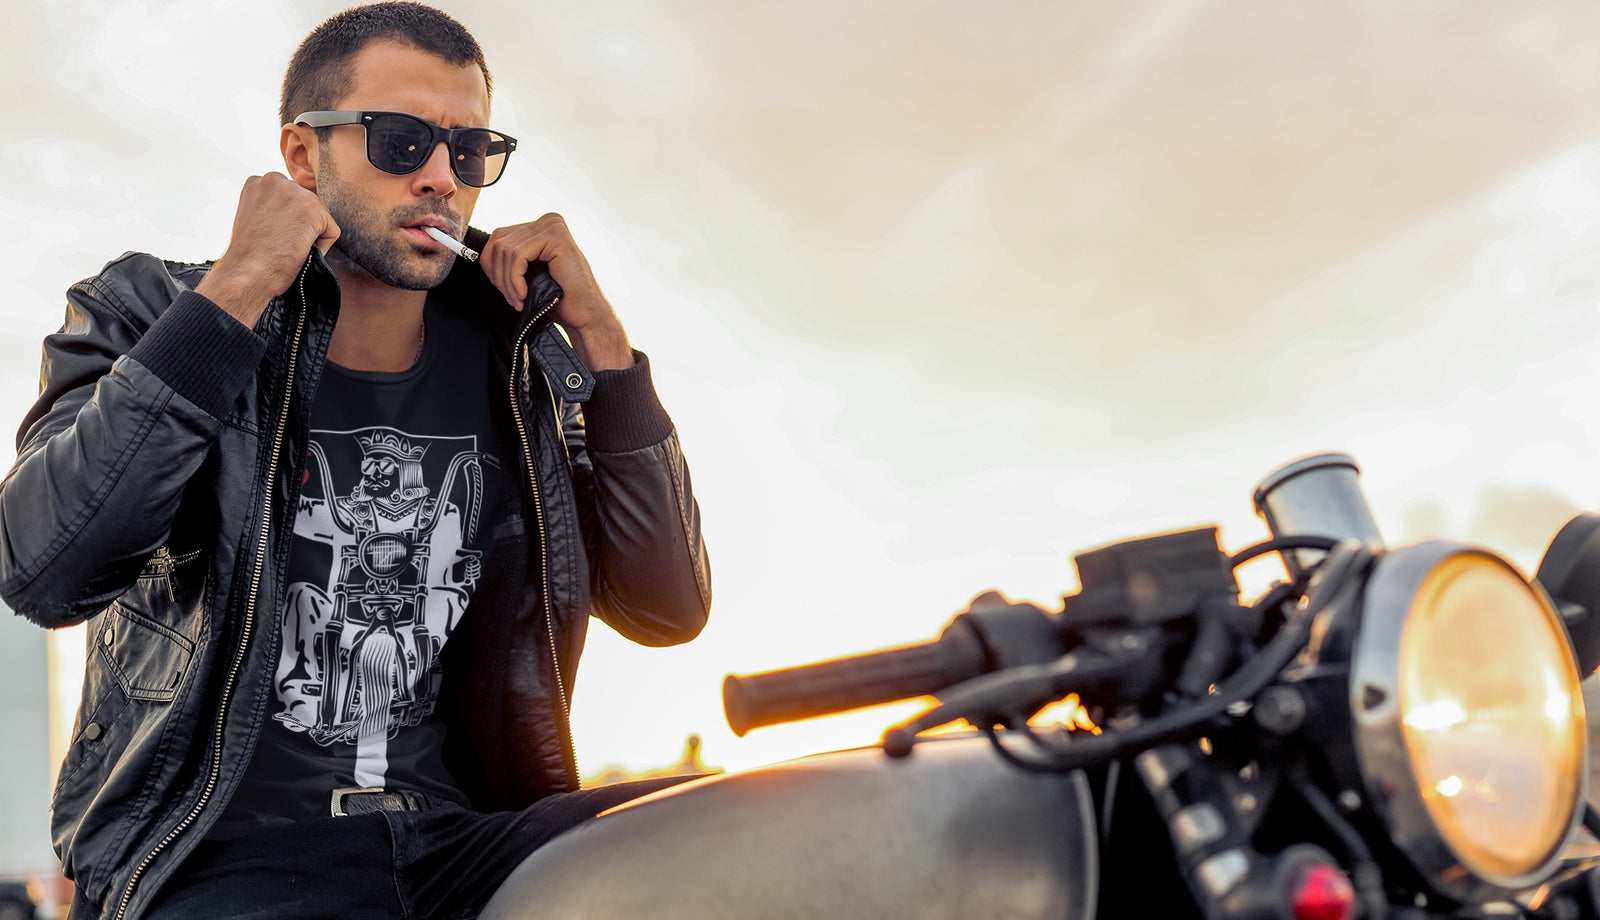 Biker Fashion: Stay Looking Sharp While Burning out The Road - Honda ...